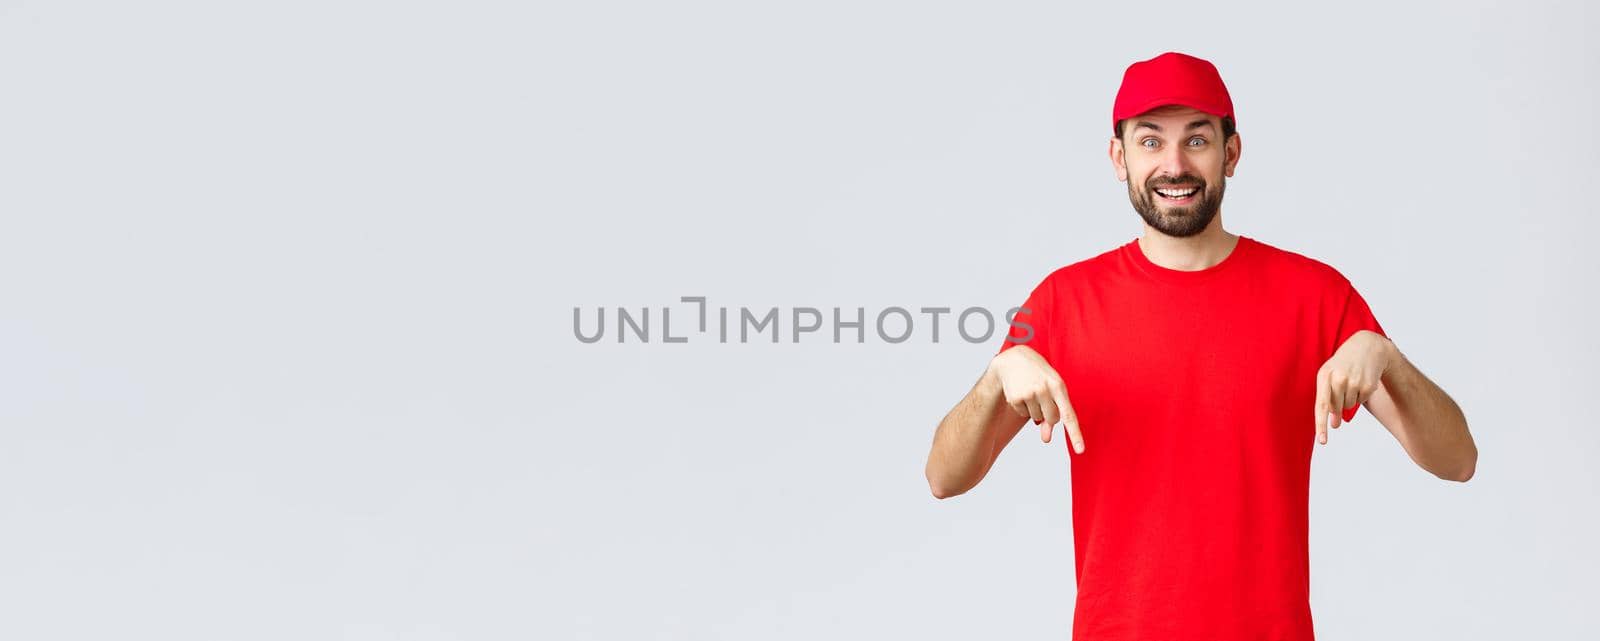 Online shopping, delivery during quarantine and takeaway concept. Cheerful smiling, amused courier in red uniform cap and t-shirt, excited about new promo, pointing fingers down, grey background.